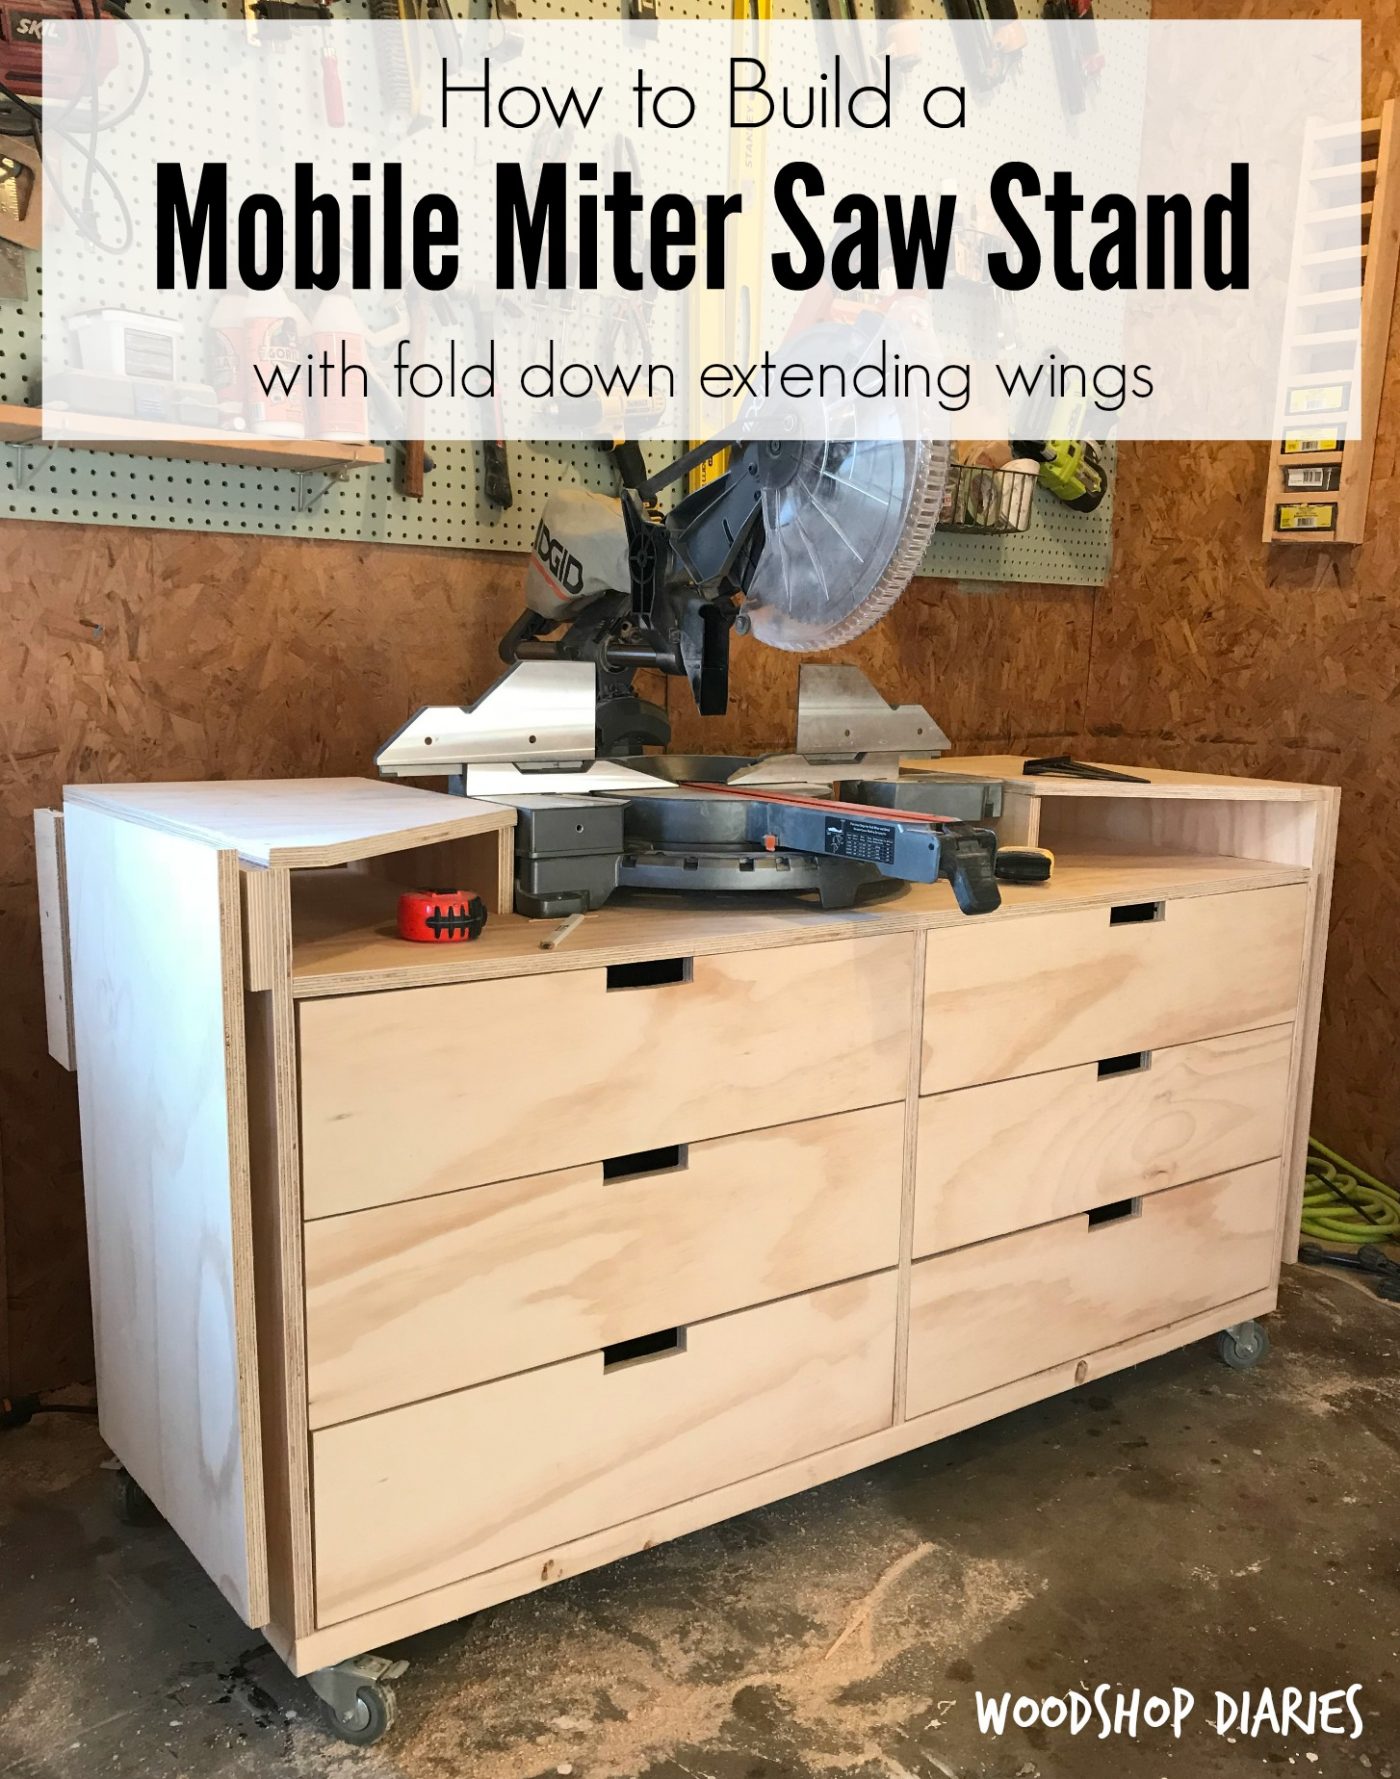 Mobile miter saw stand in workshop with text overlay: how to build a mobile miter saw stand with fold down extending wings